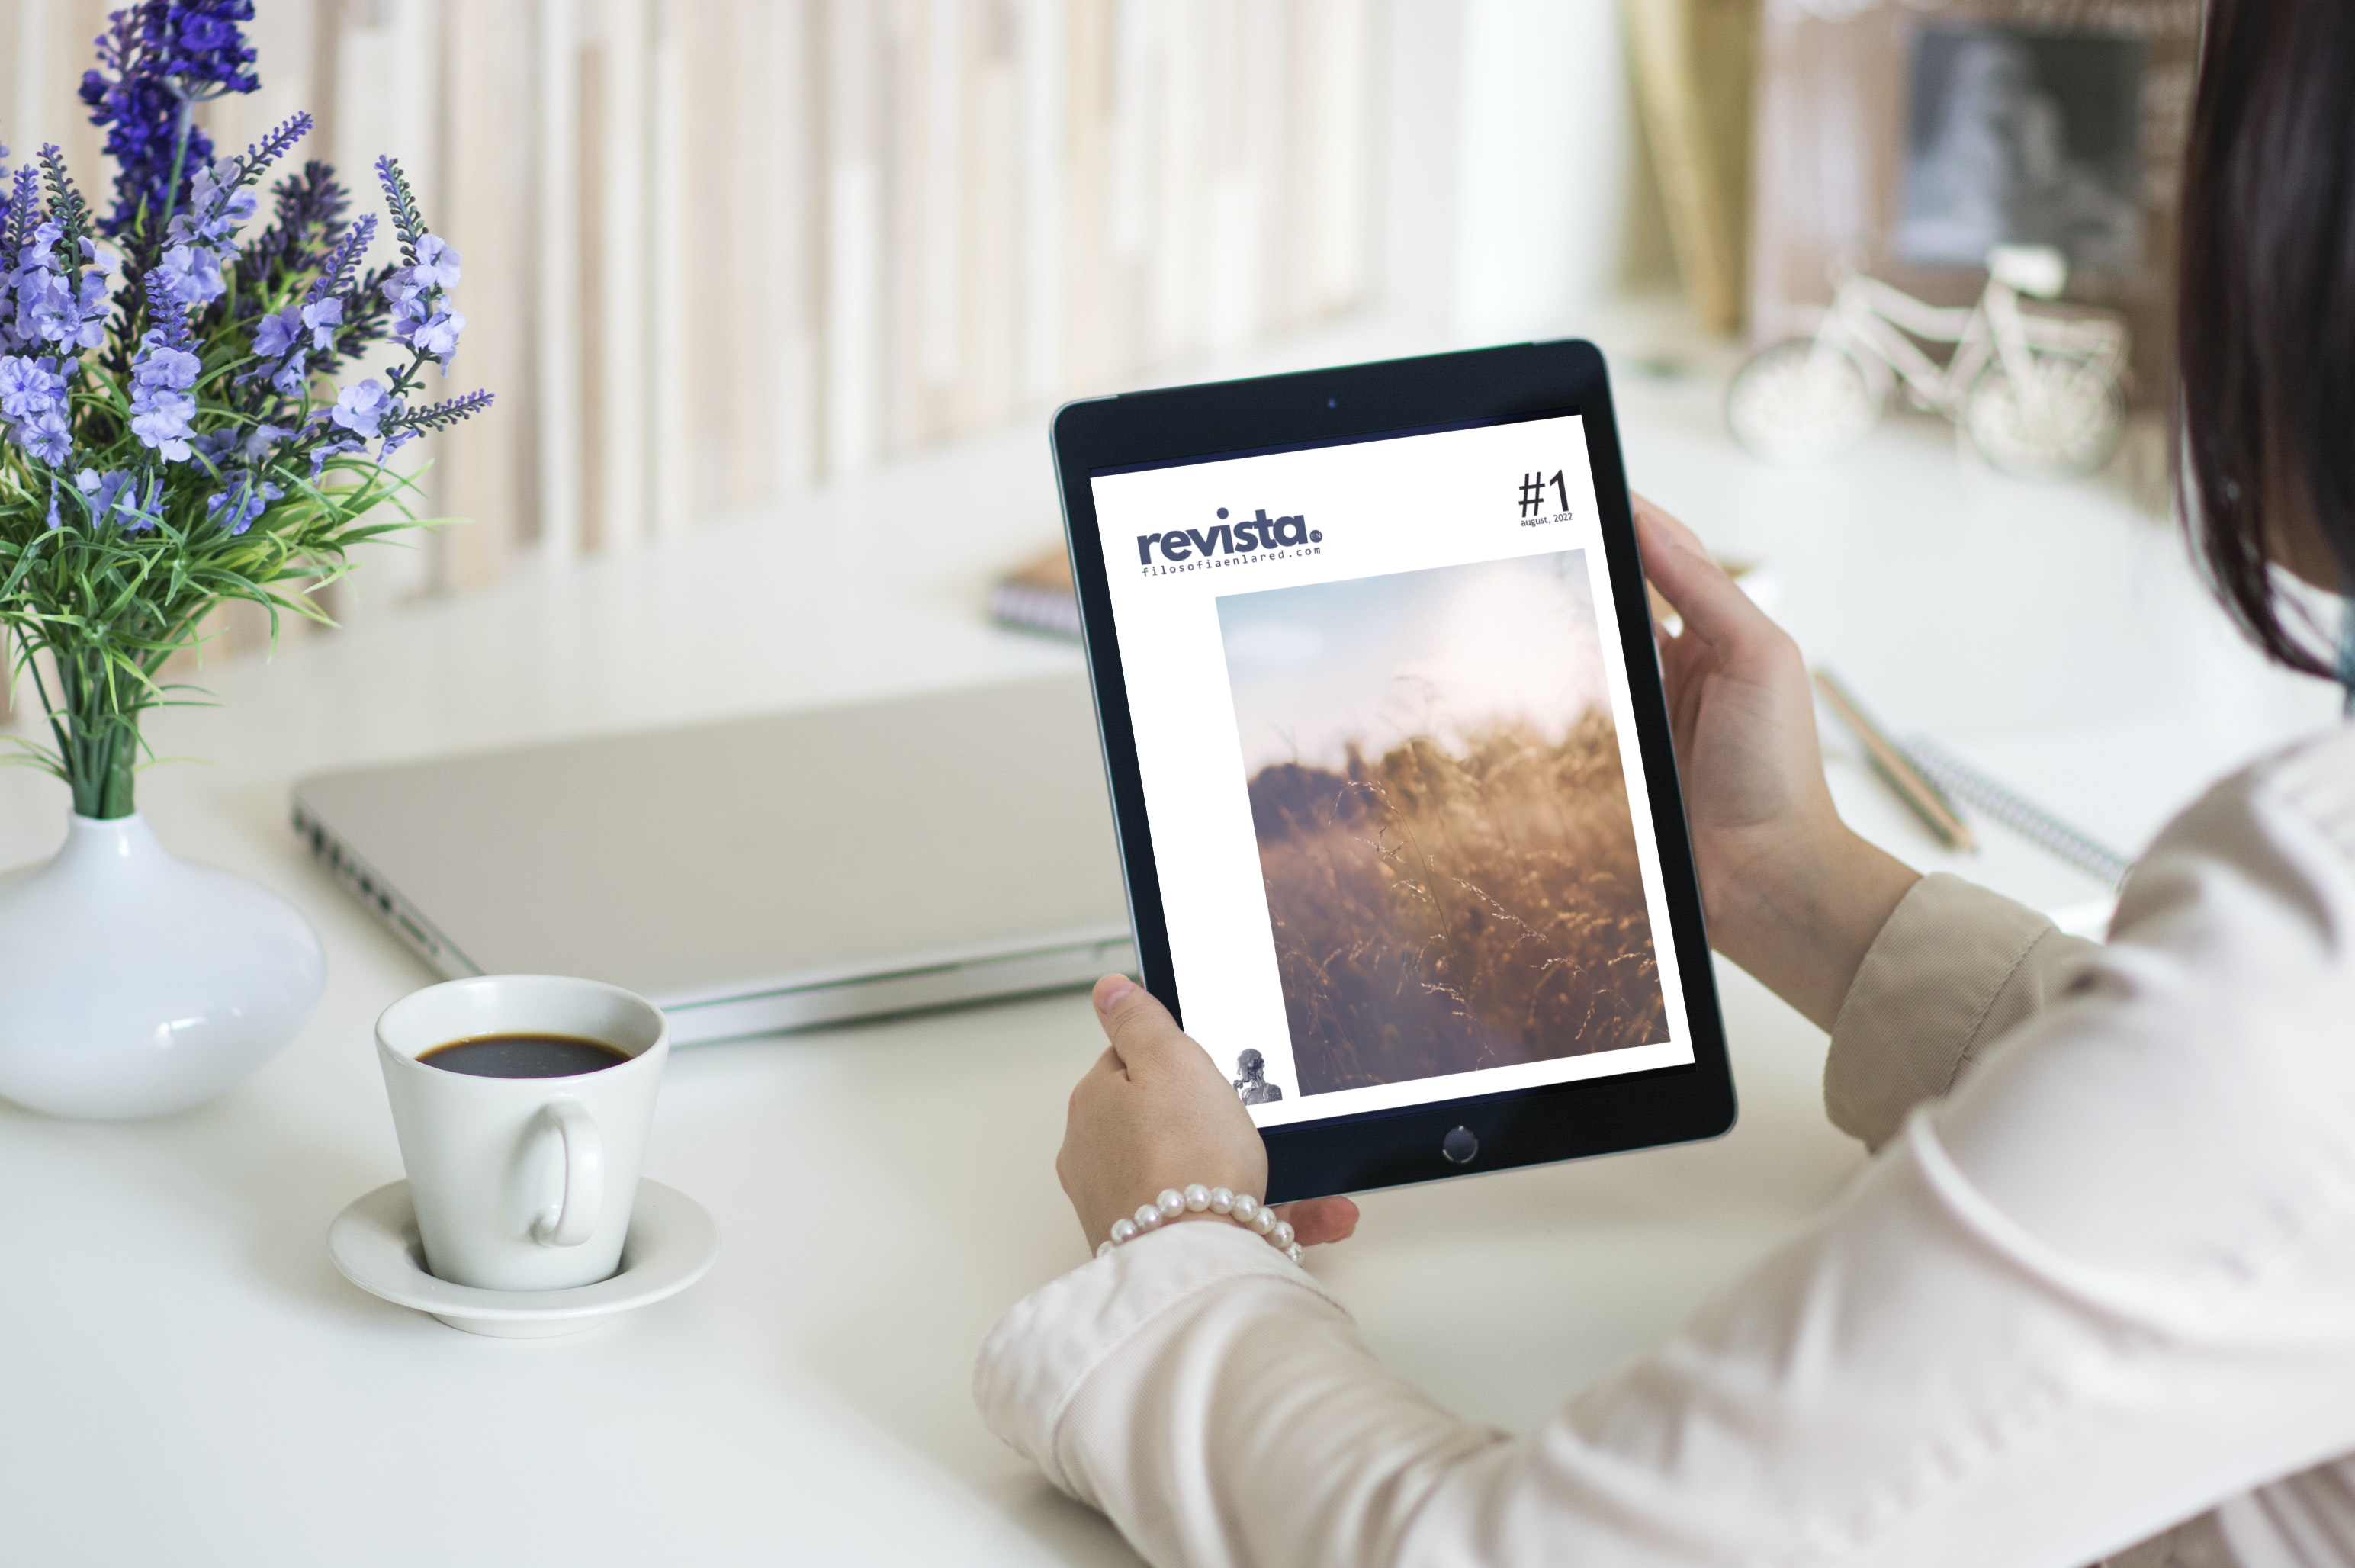 Person reading Revista on a tablet at a white desk with purple flowers on it